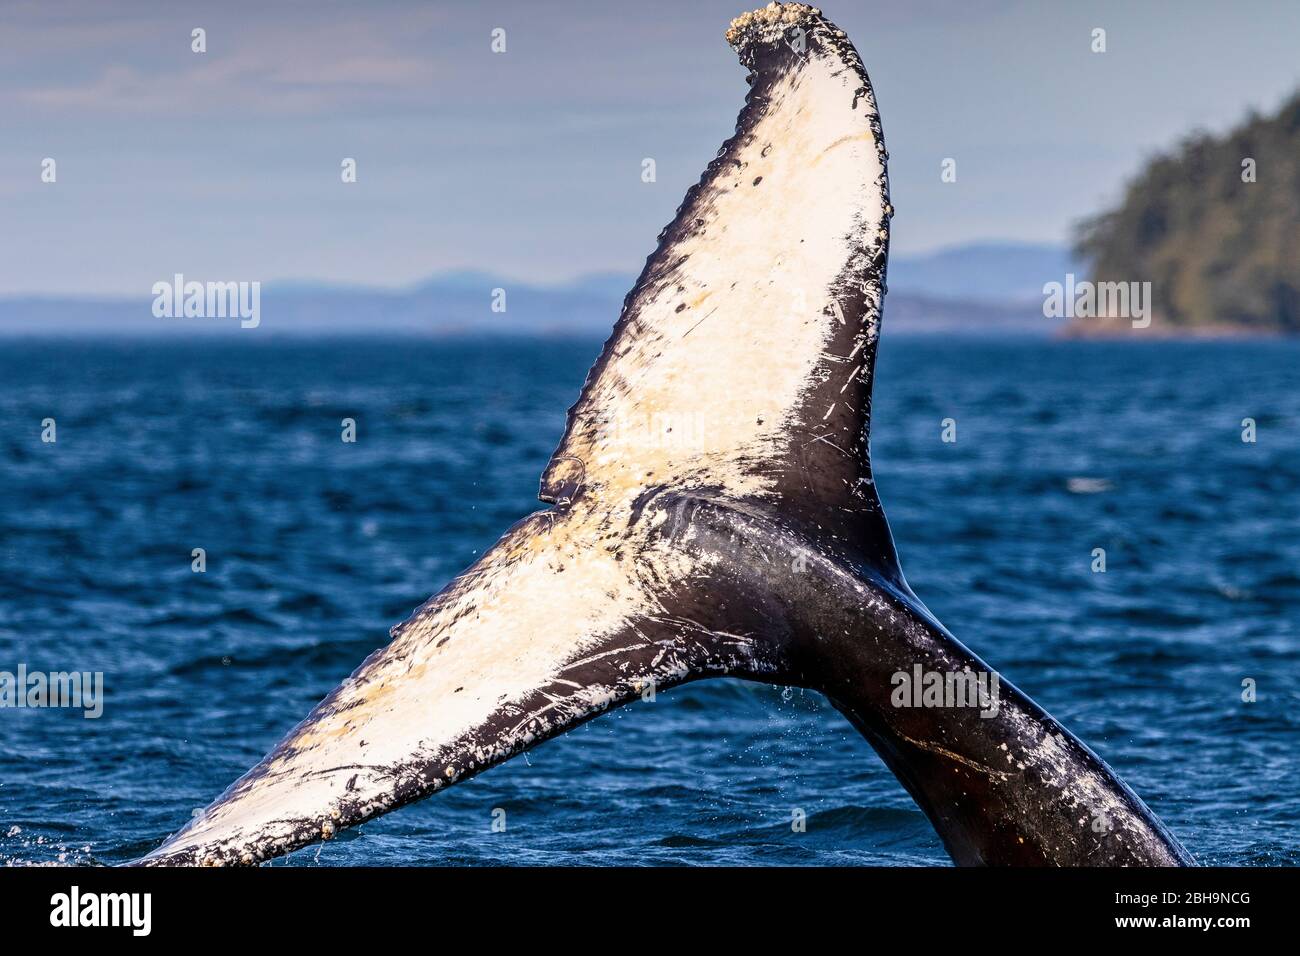 Tail fin of a humpback whale near an island of the Broughton Archipelago, First Nations Territory, British Columbia, Canada Stock Photo